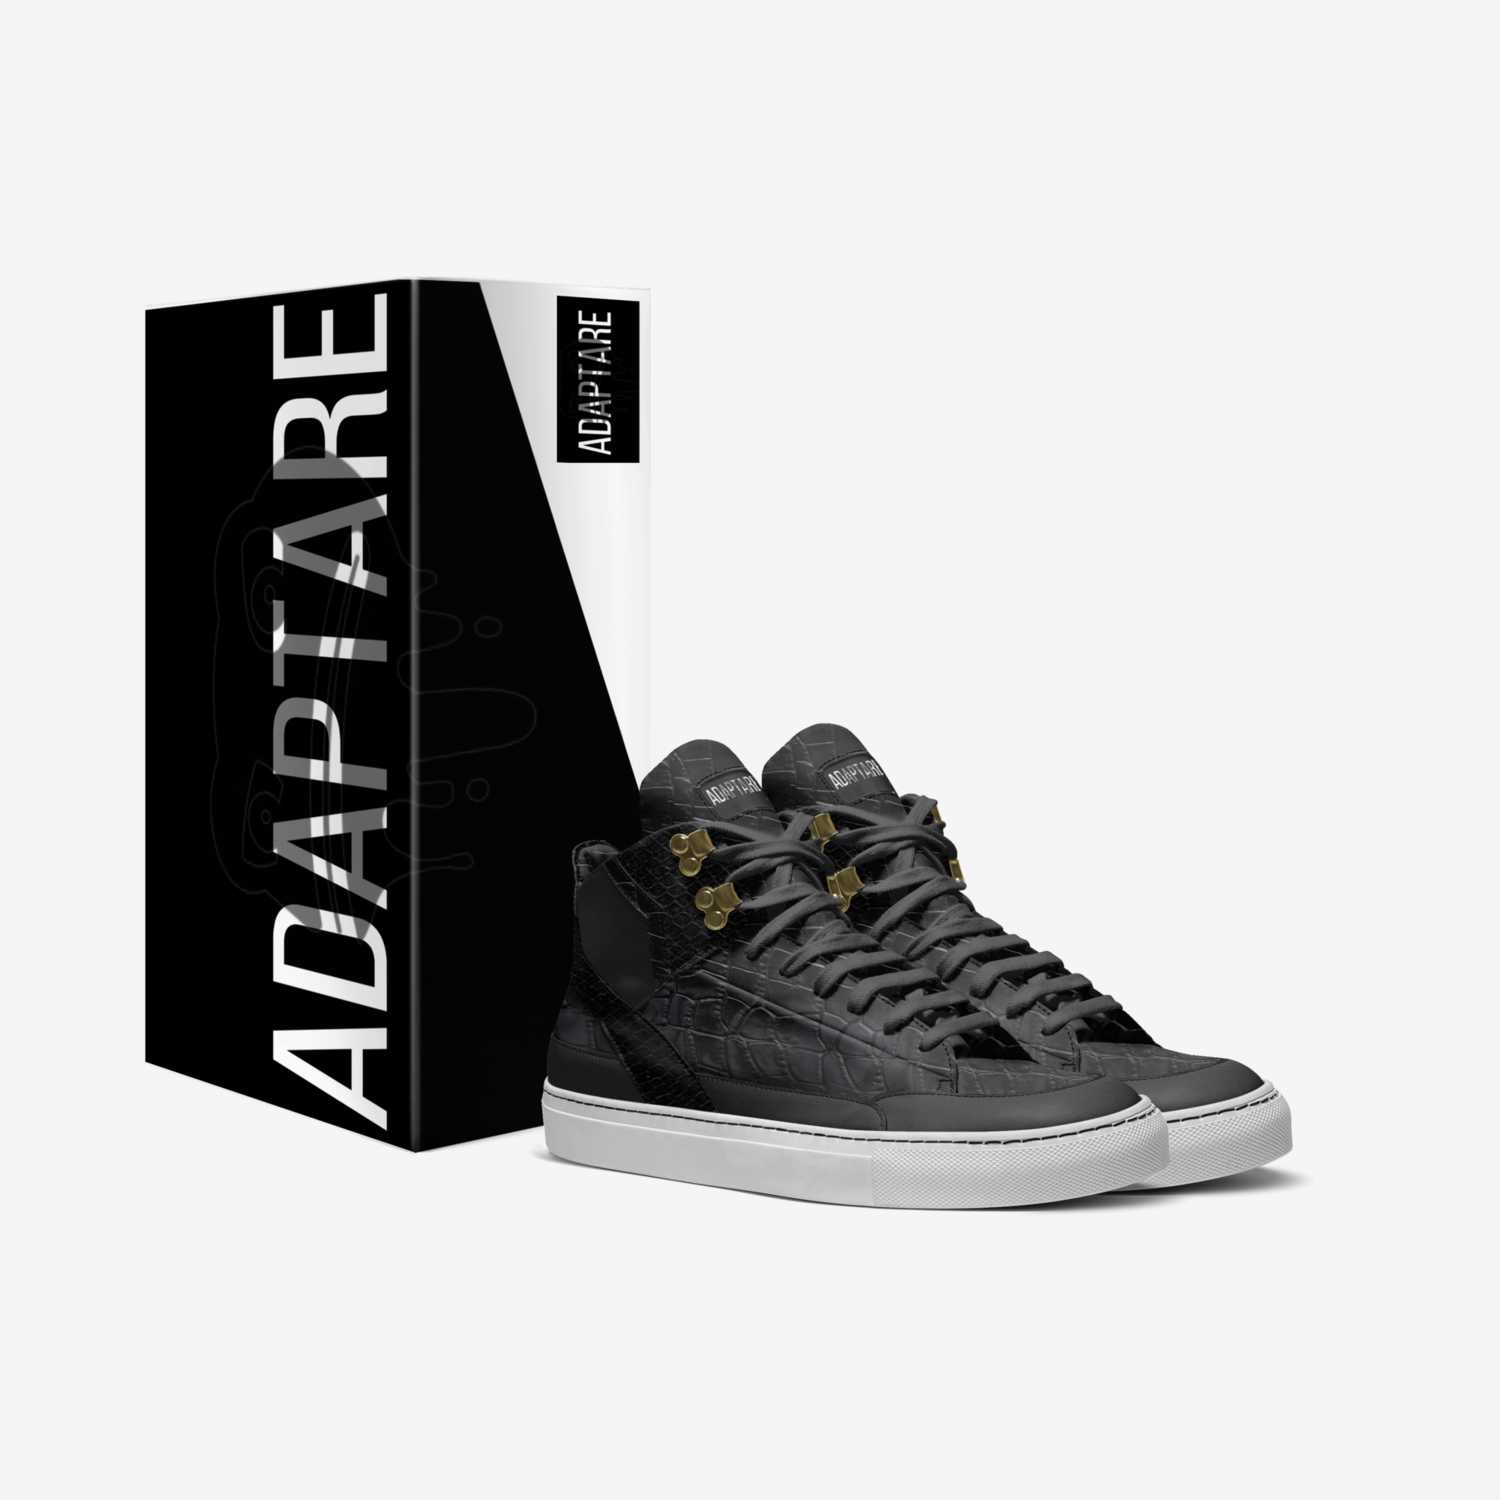 ADAPTARE custom made in Italy shoes by Anthony Barber (tha Builder) | Box view